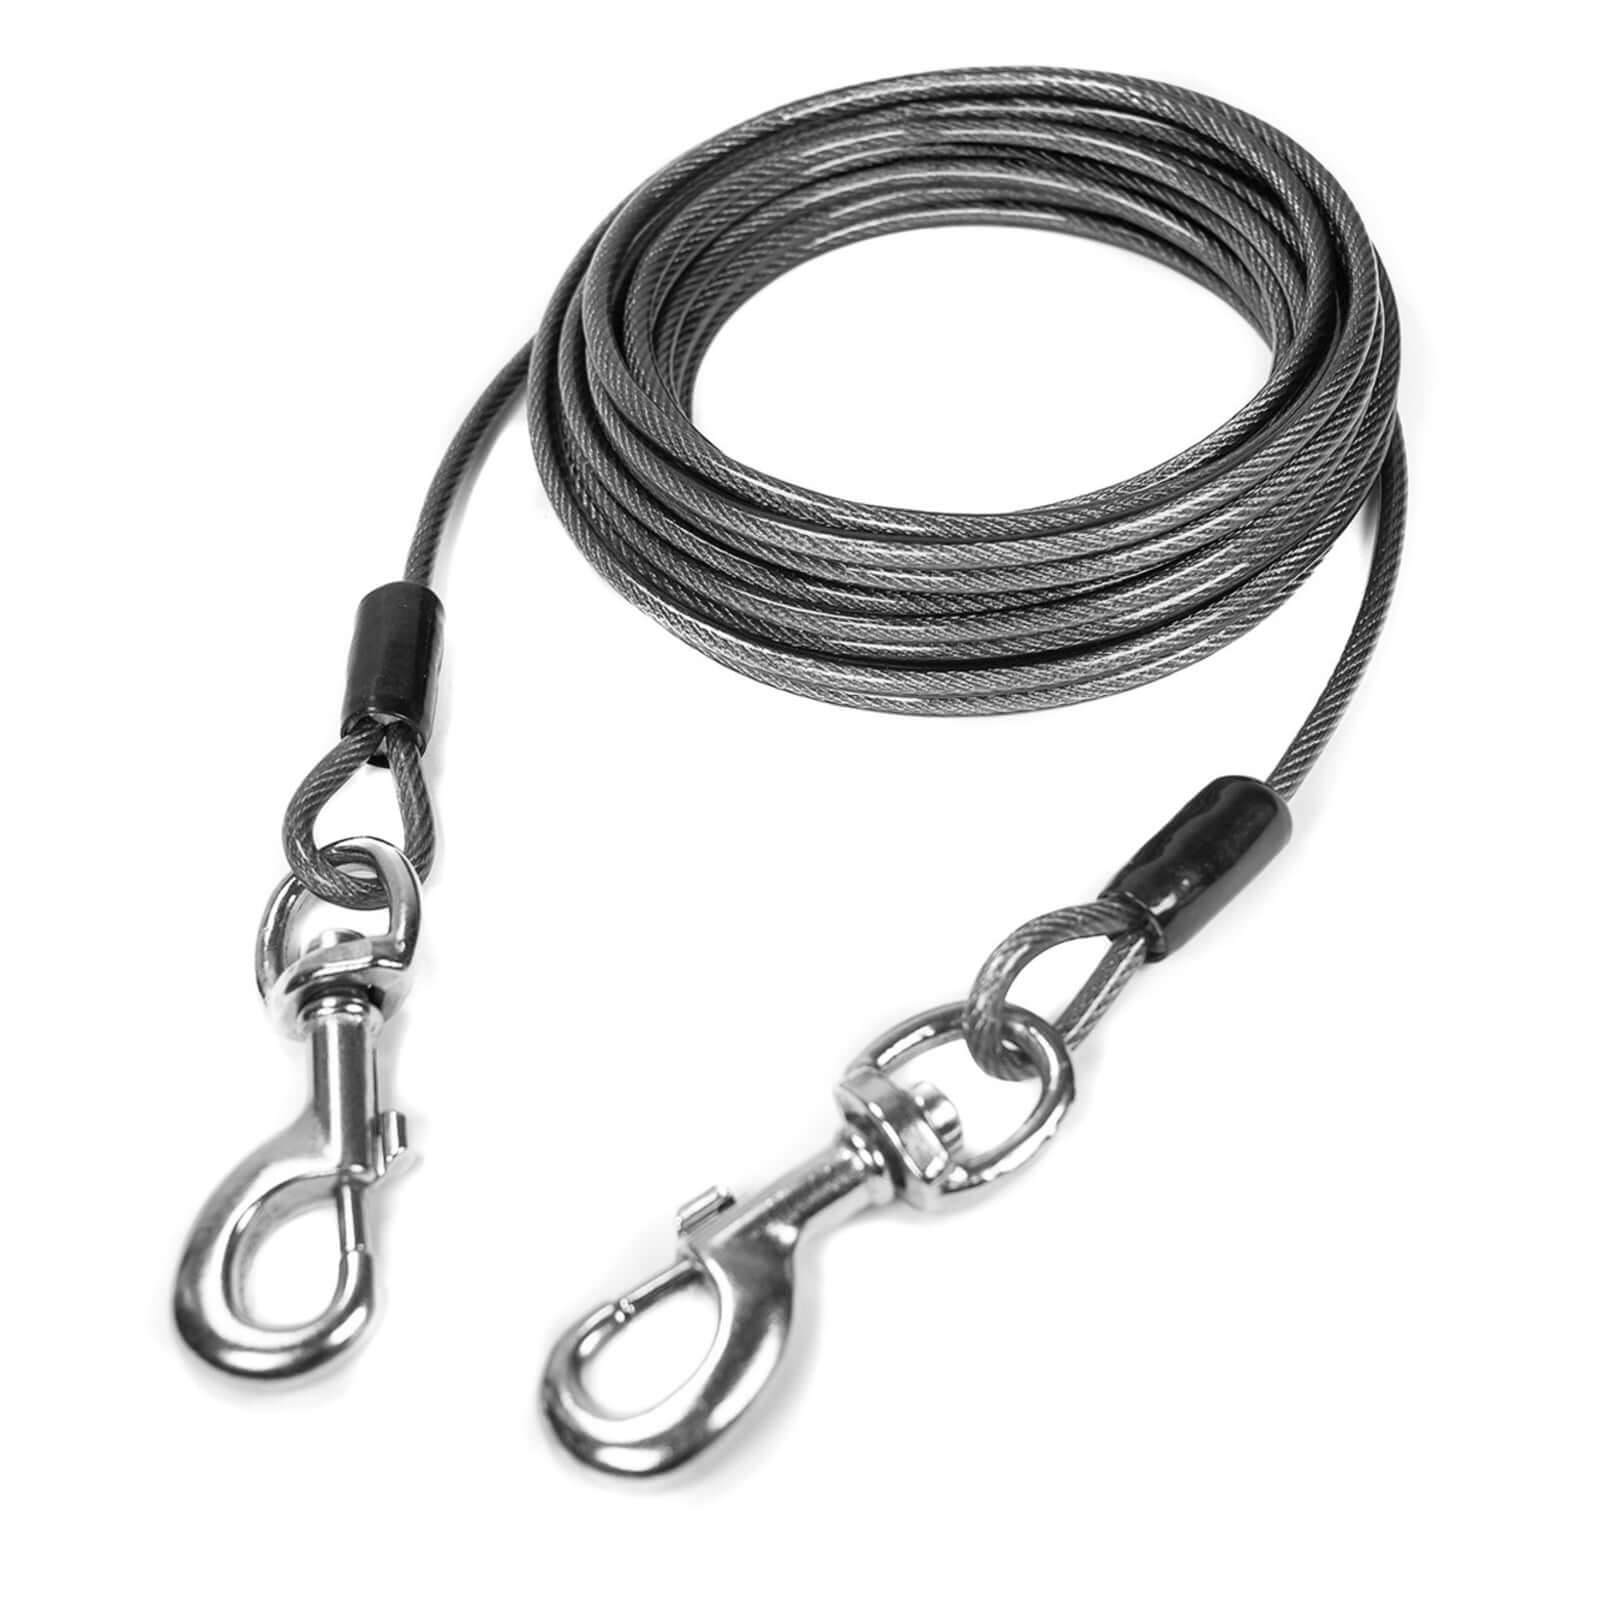 Mighty Paw 30' Reflective Tie Out Cable Leash